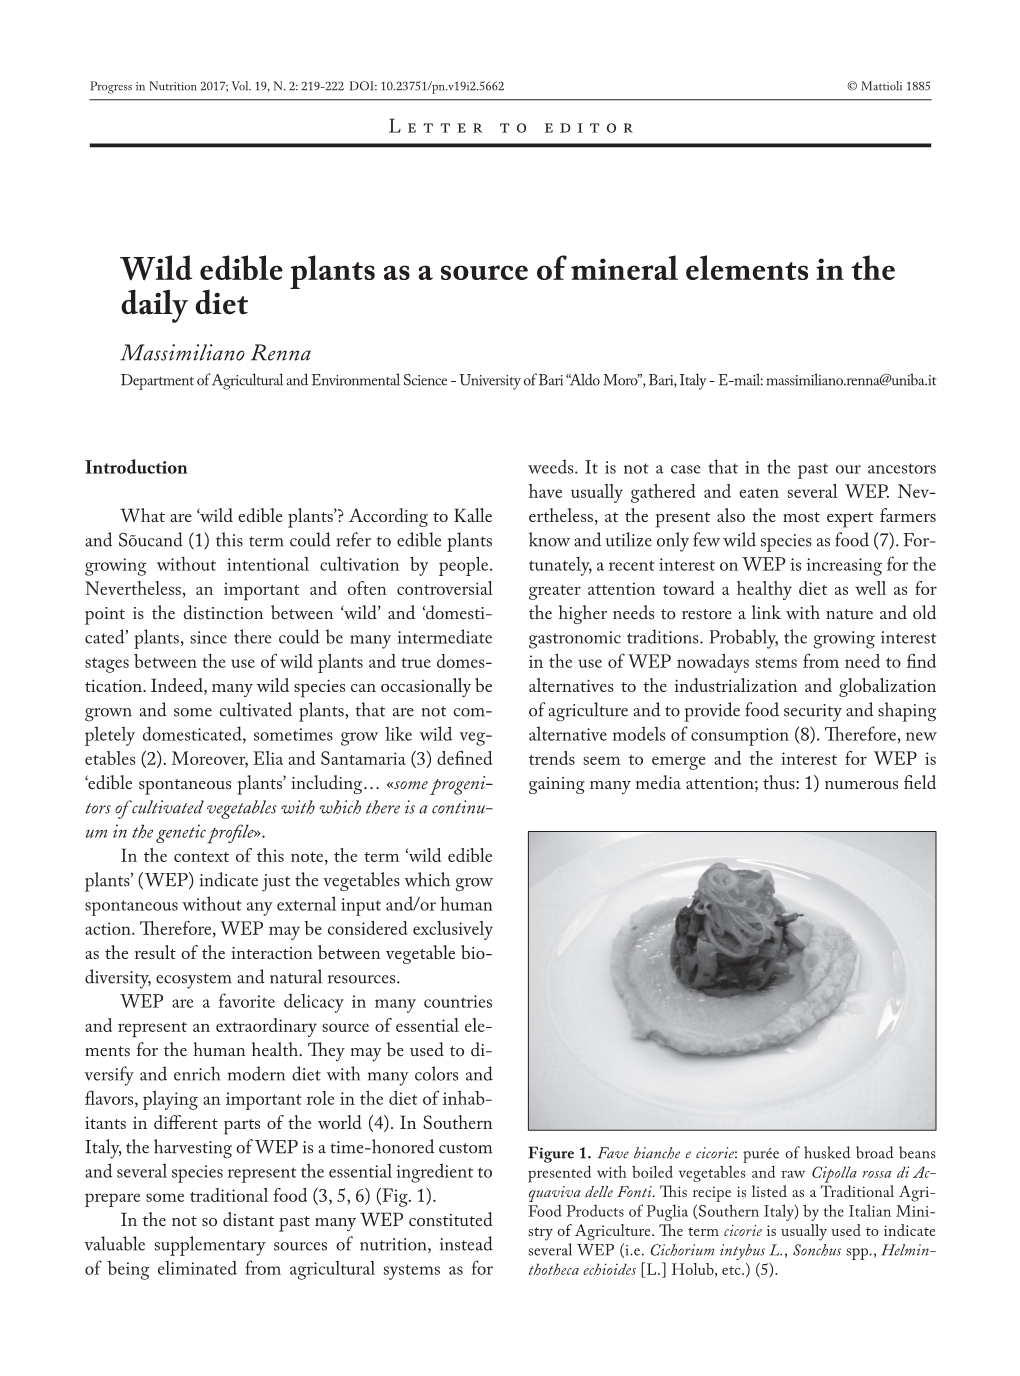 Wild Edible Plants As a Source of Mineral Elements in the Daily Diet